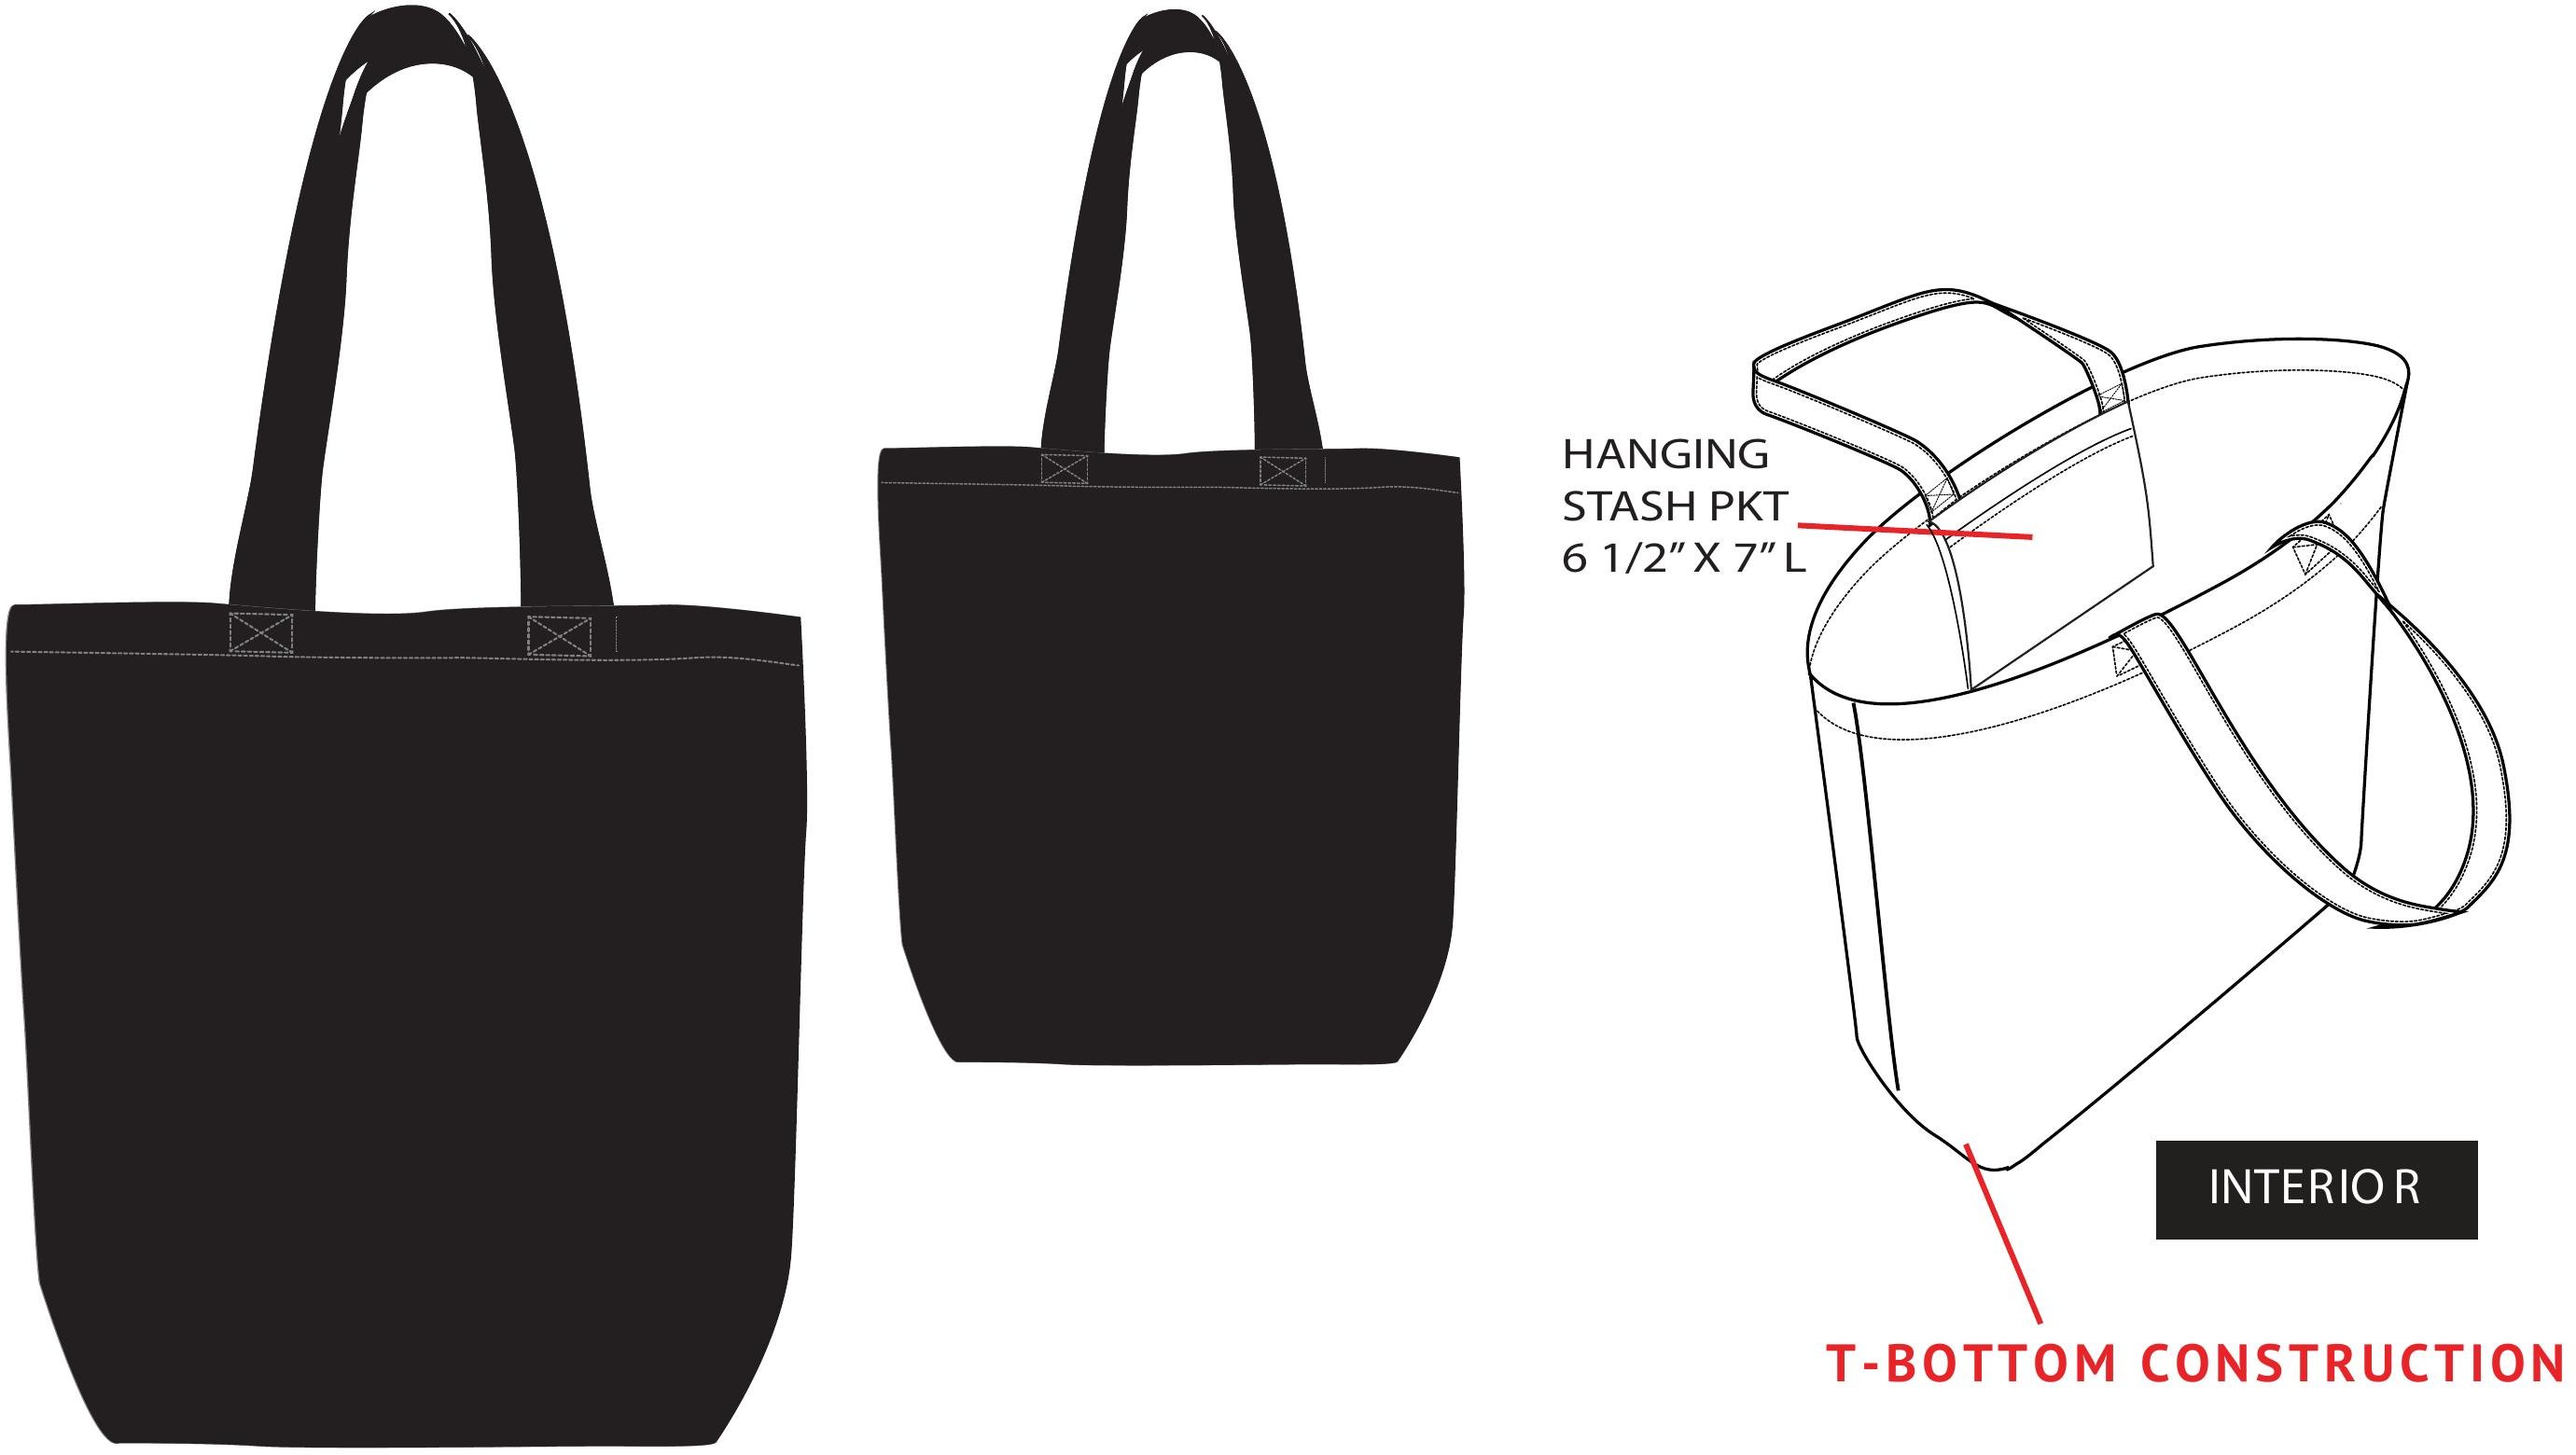 Generic black, white and natural tote bag-no screen print , only blank in 12oz cotton canvas with interior hanging pkt 1